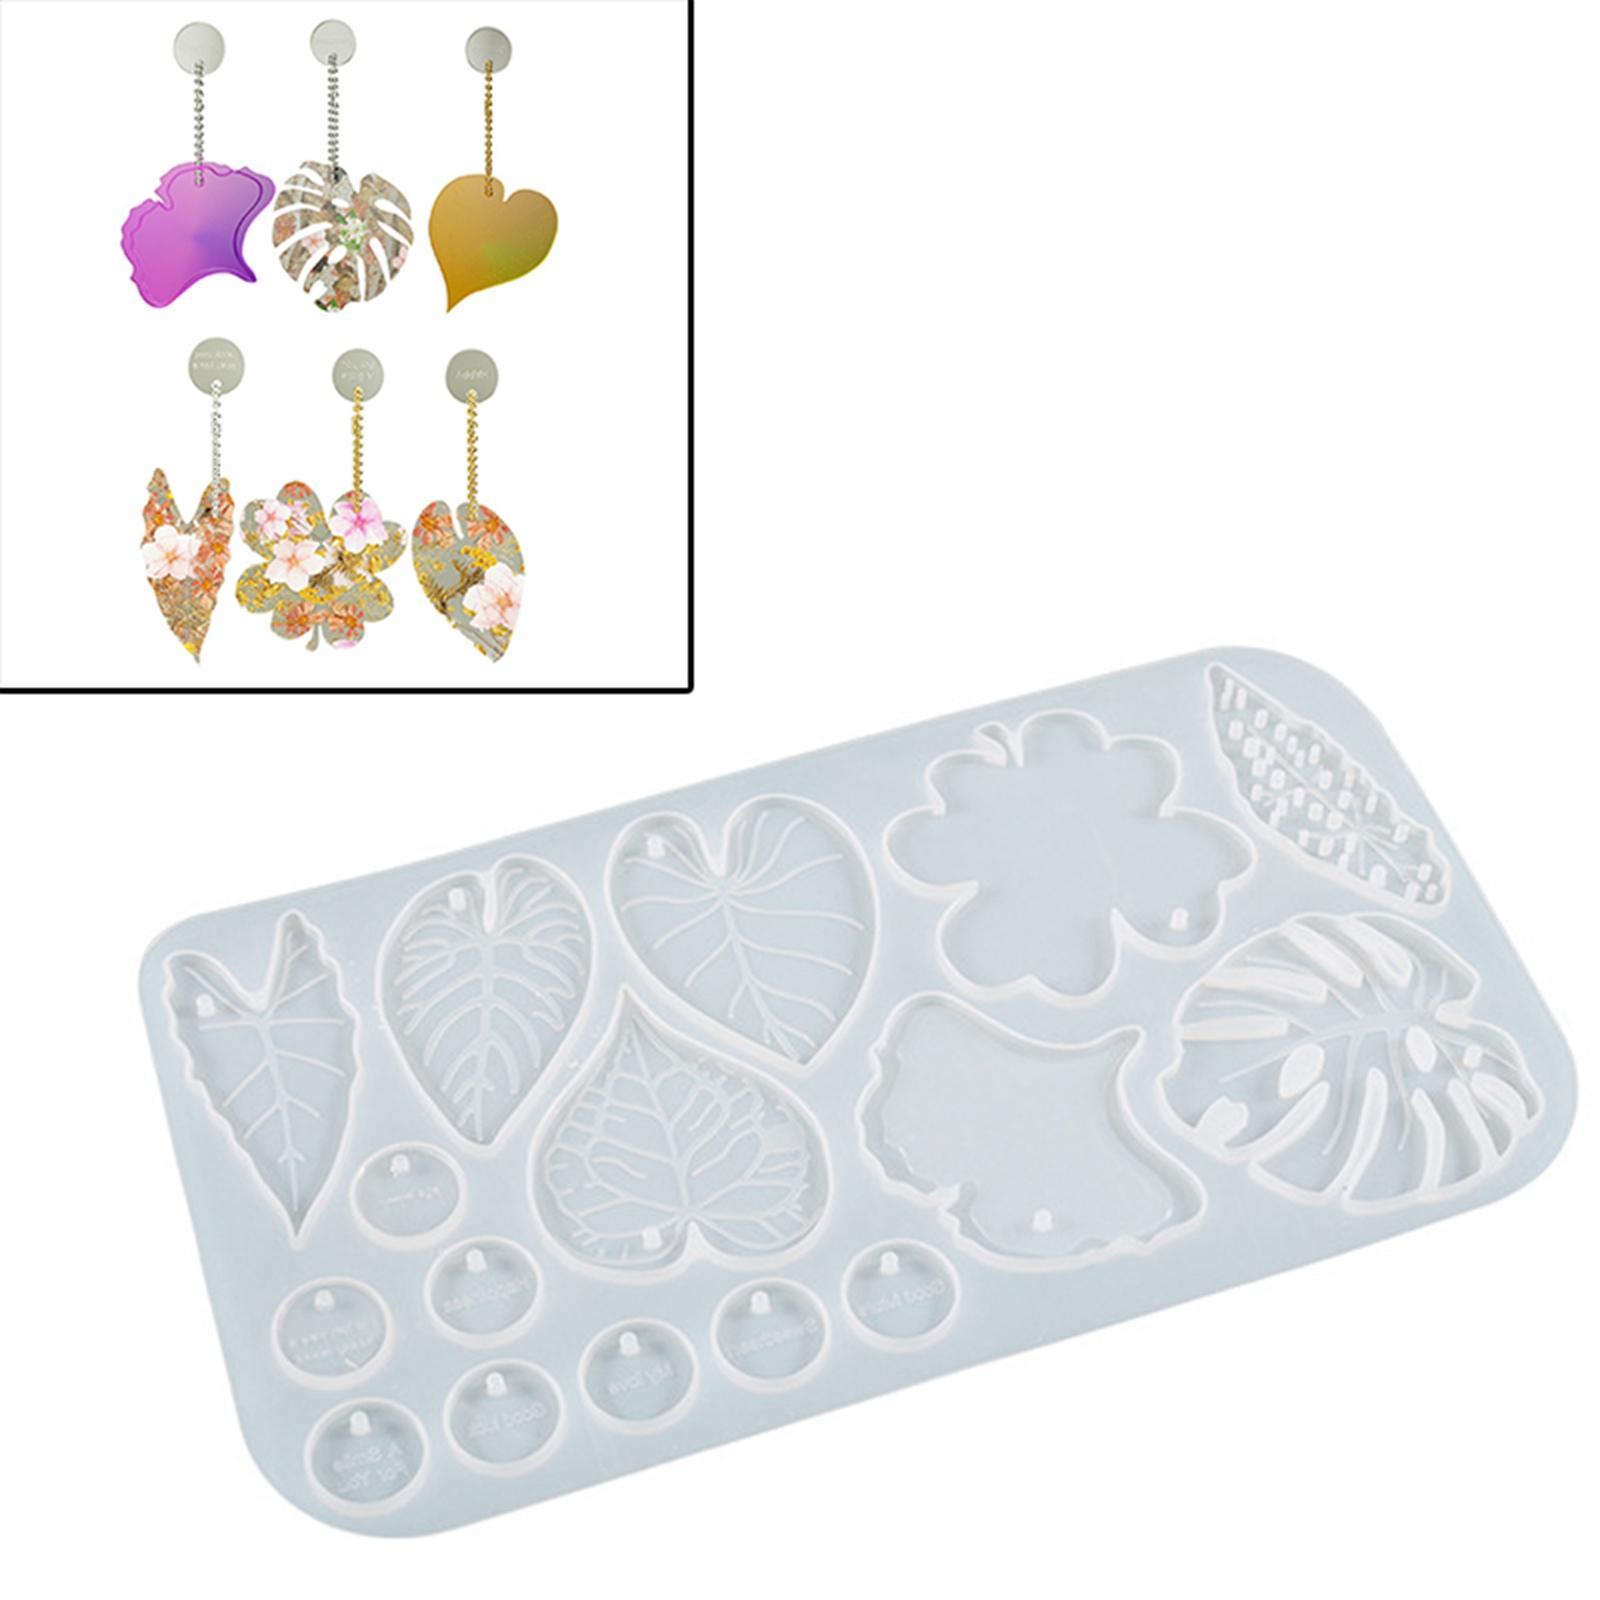 Leaves Shaped Pendant Resin Casting Tool Gifts Silicone for Earring Keychain